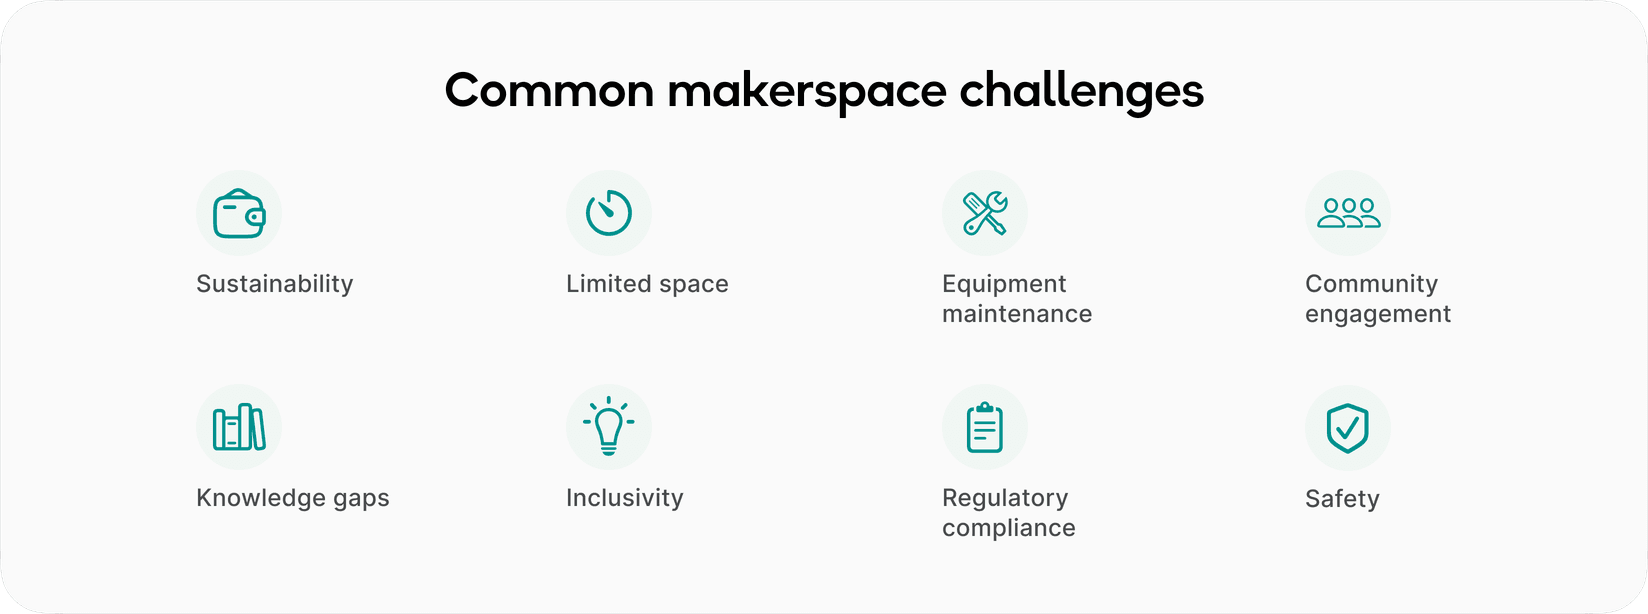 What are common makerspace challenges